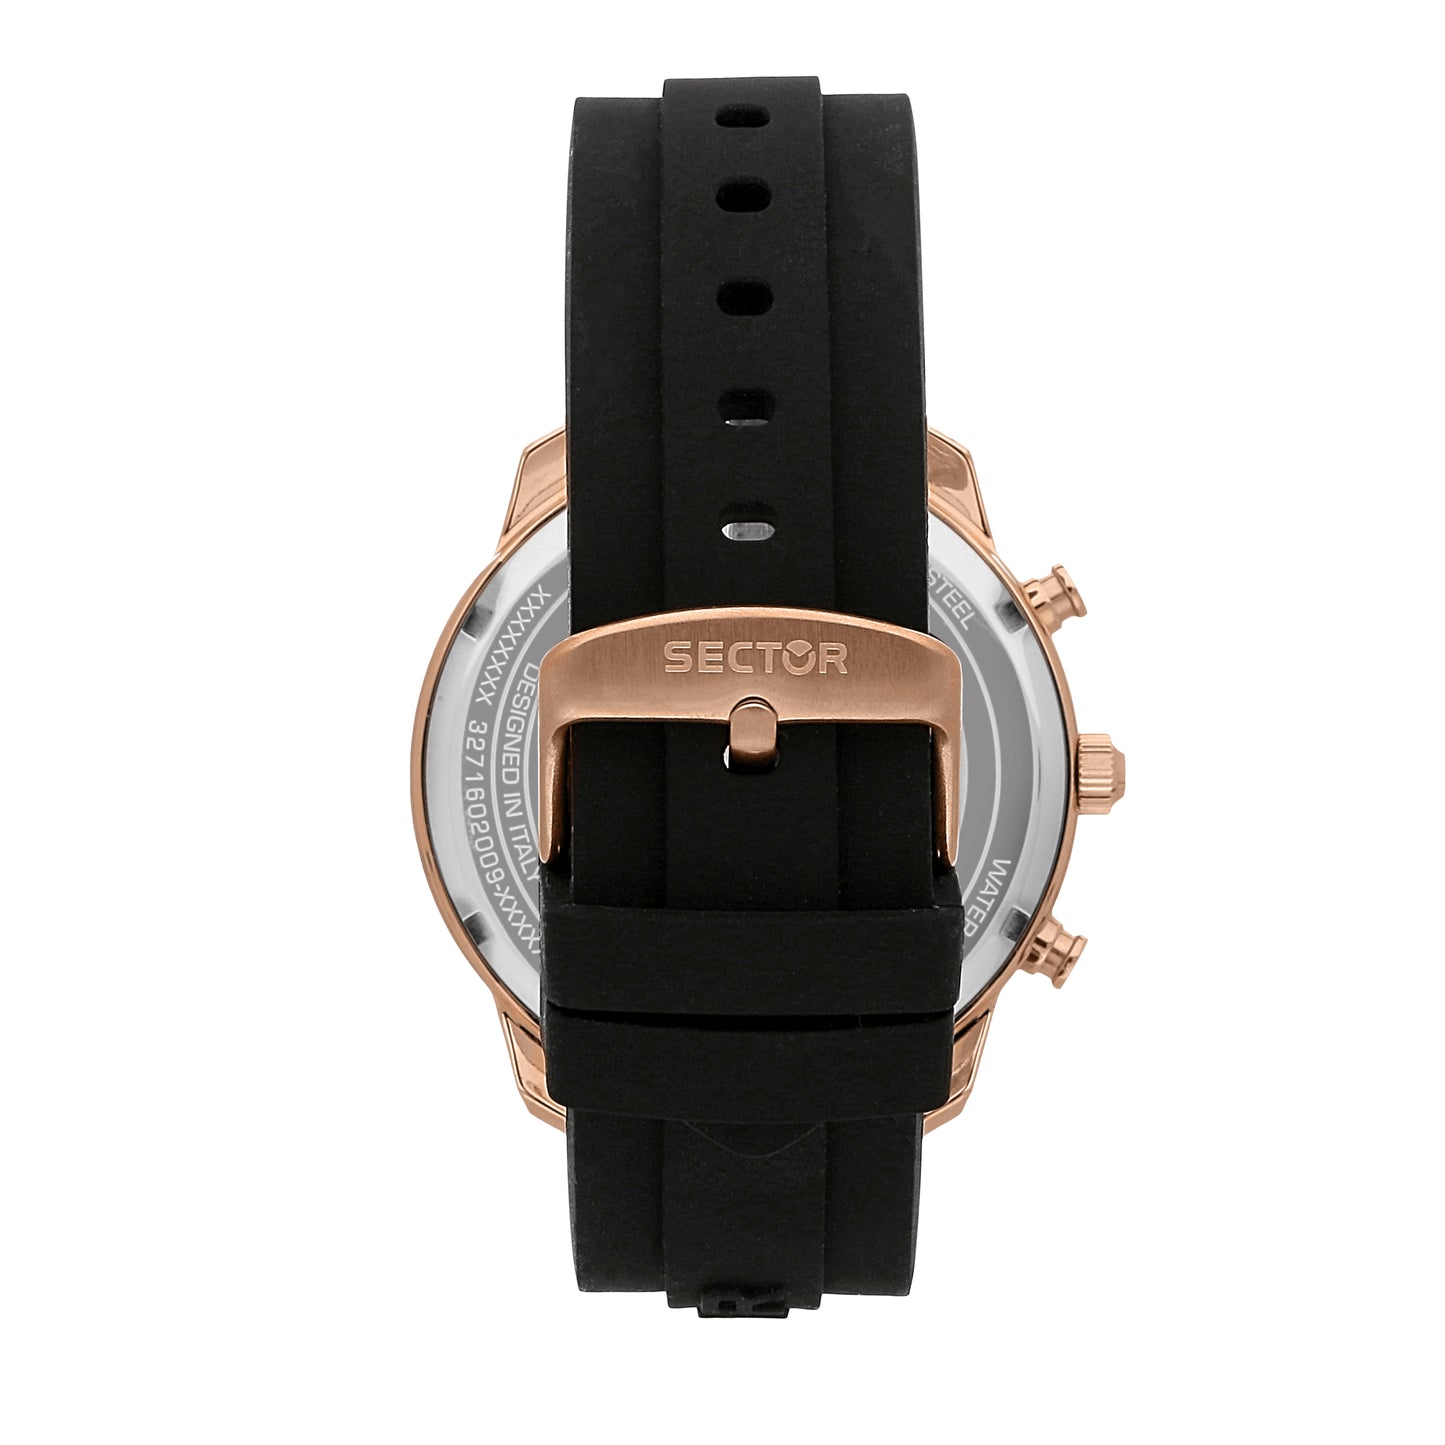 MONTRE HOMME SECTOR OVERSIZE R3271602009